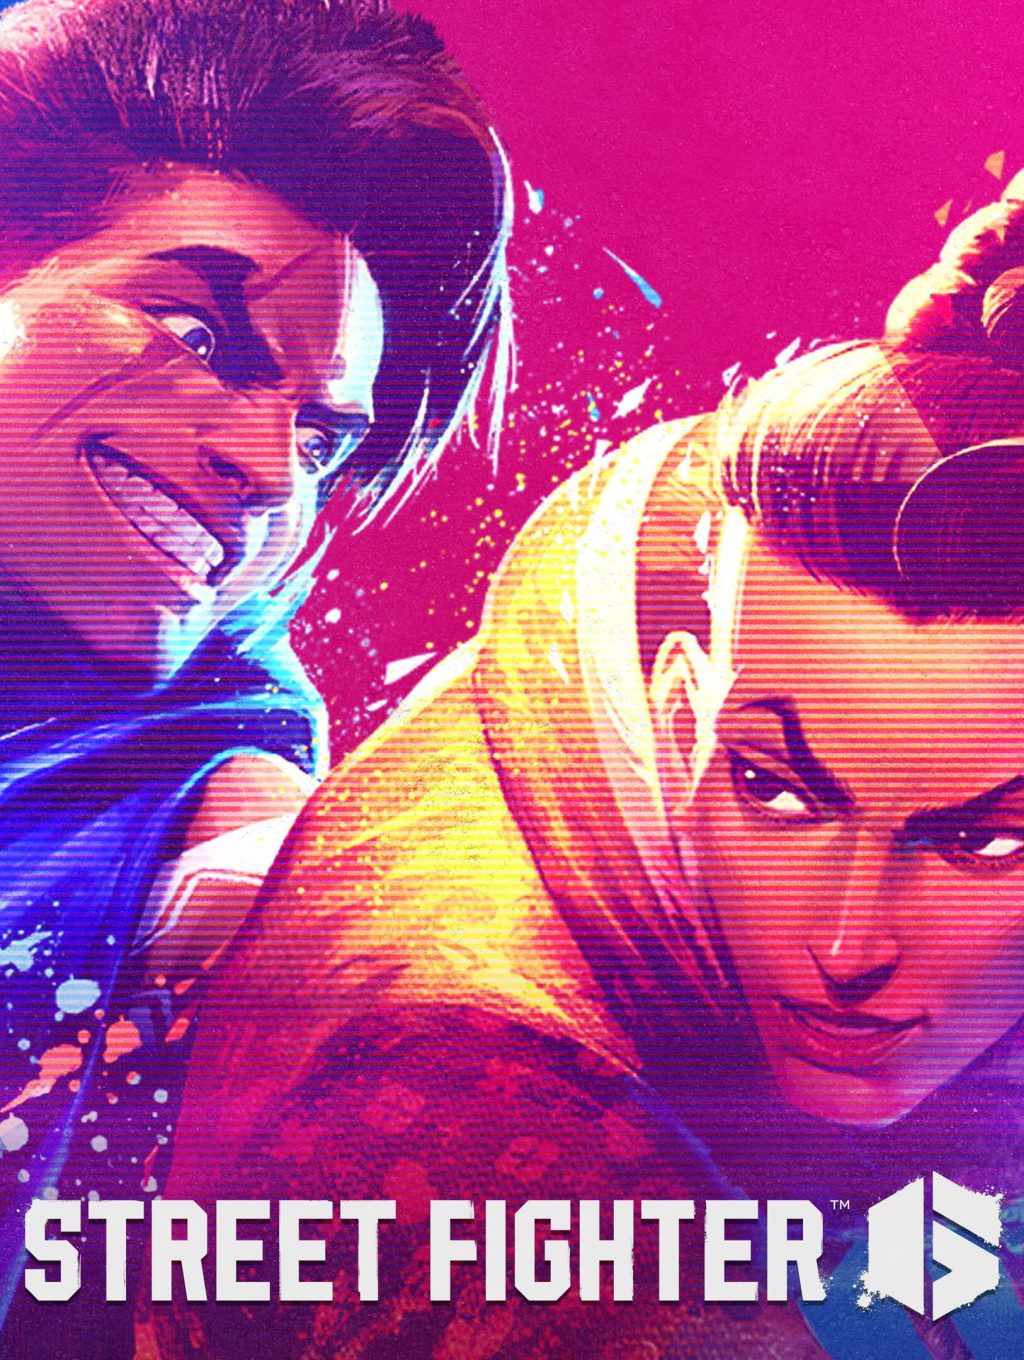 Street Fighter 6' to get open beta later this month